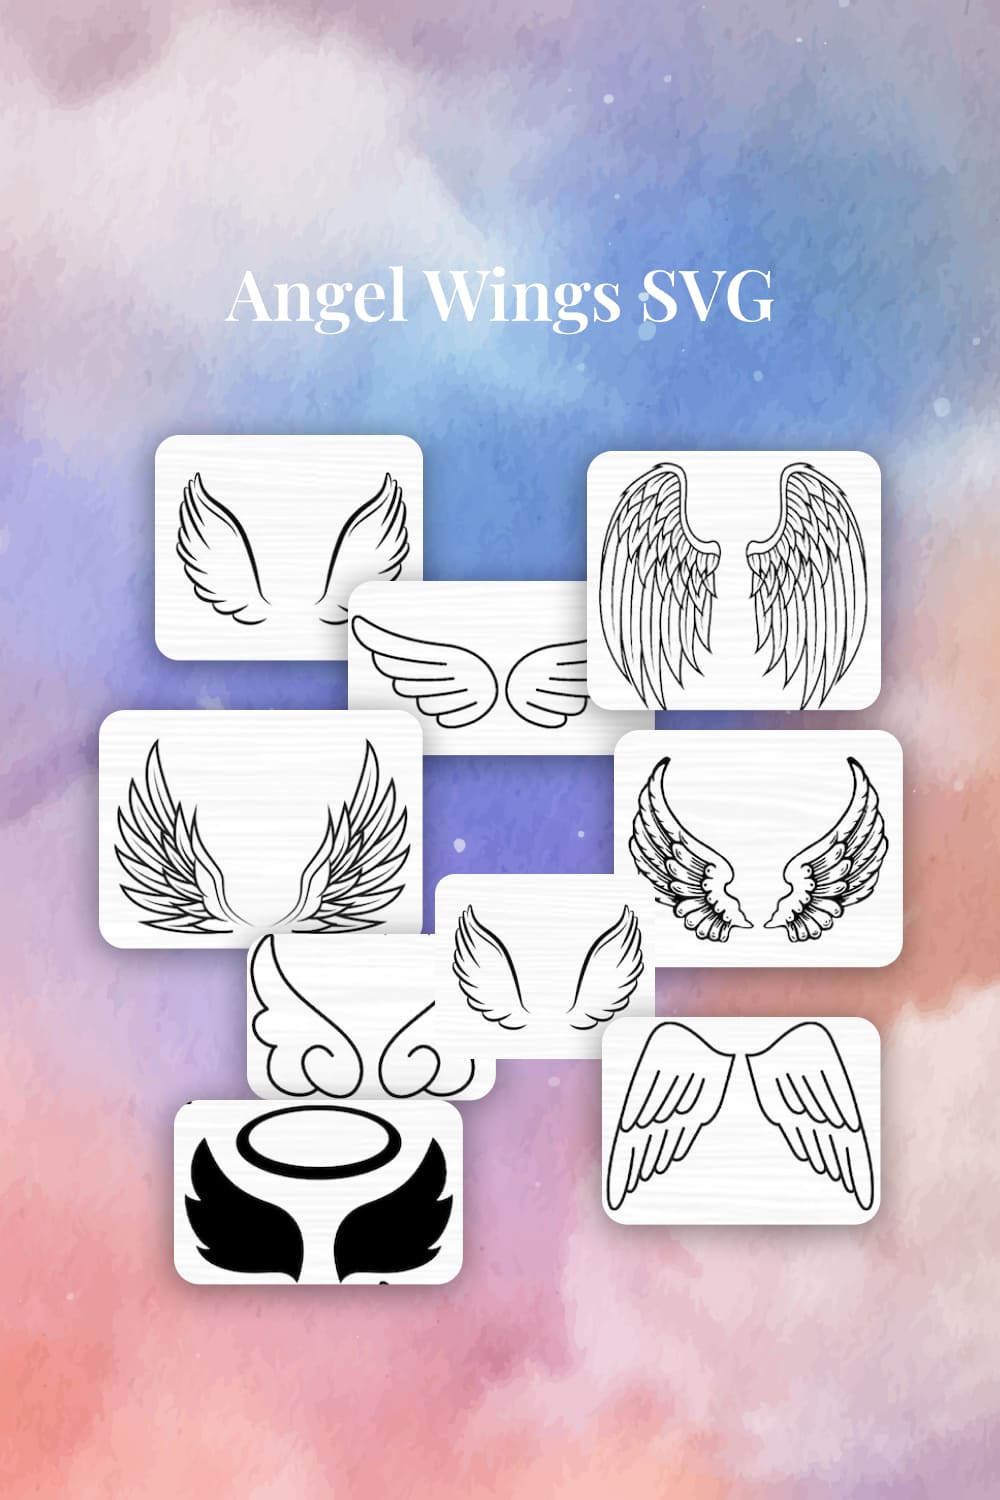 Collage depicting angel wings of various shapes and with a halo.